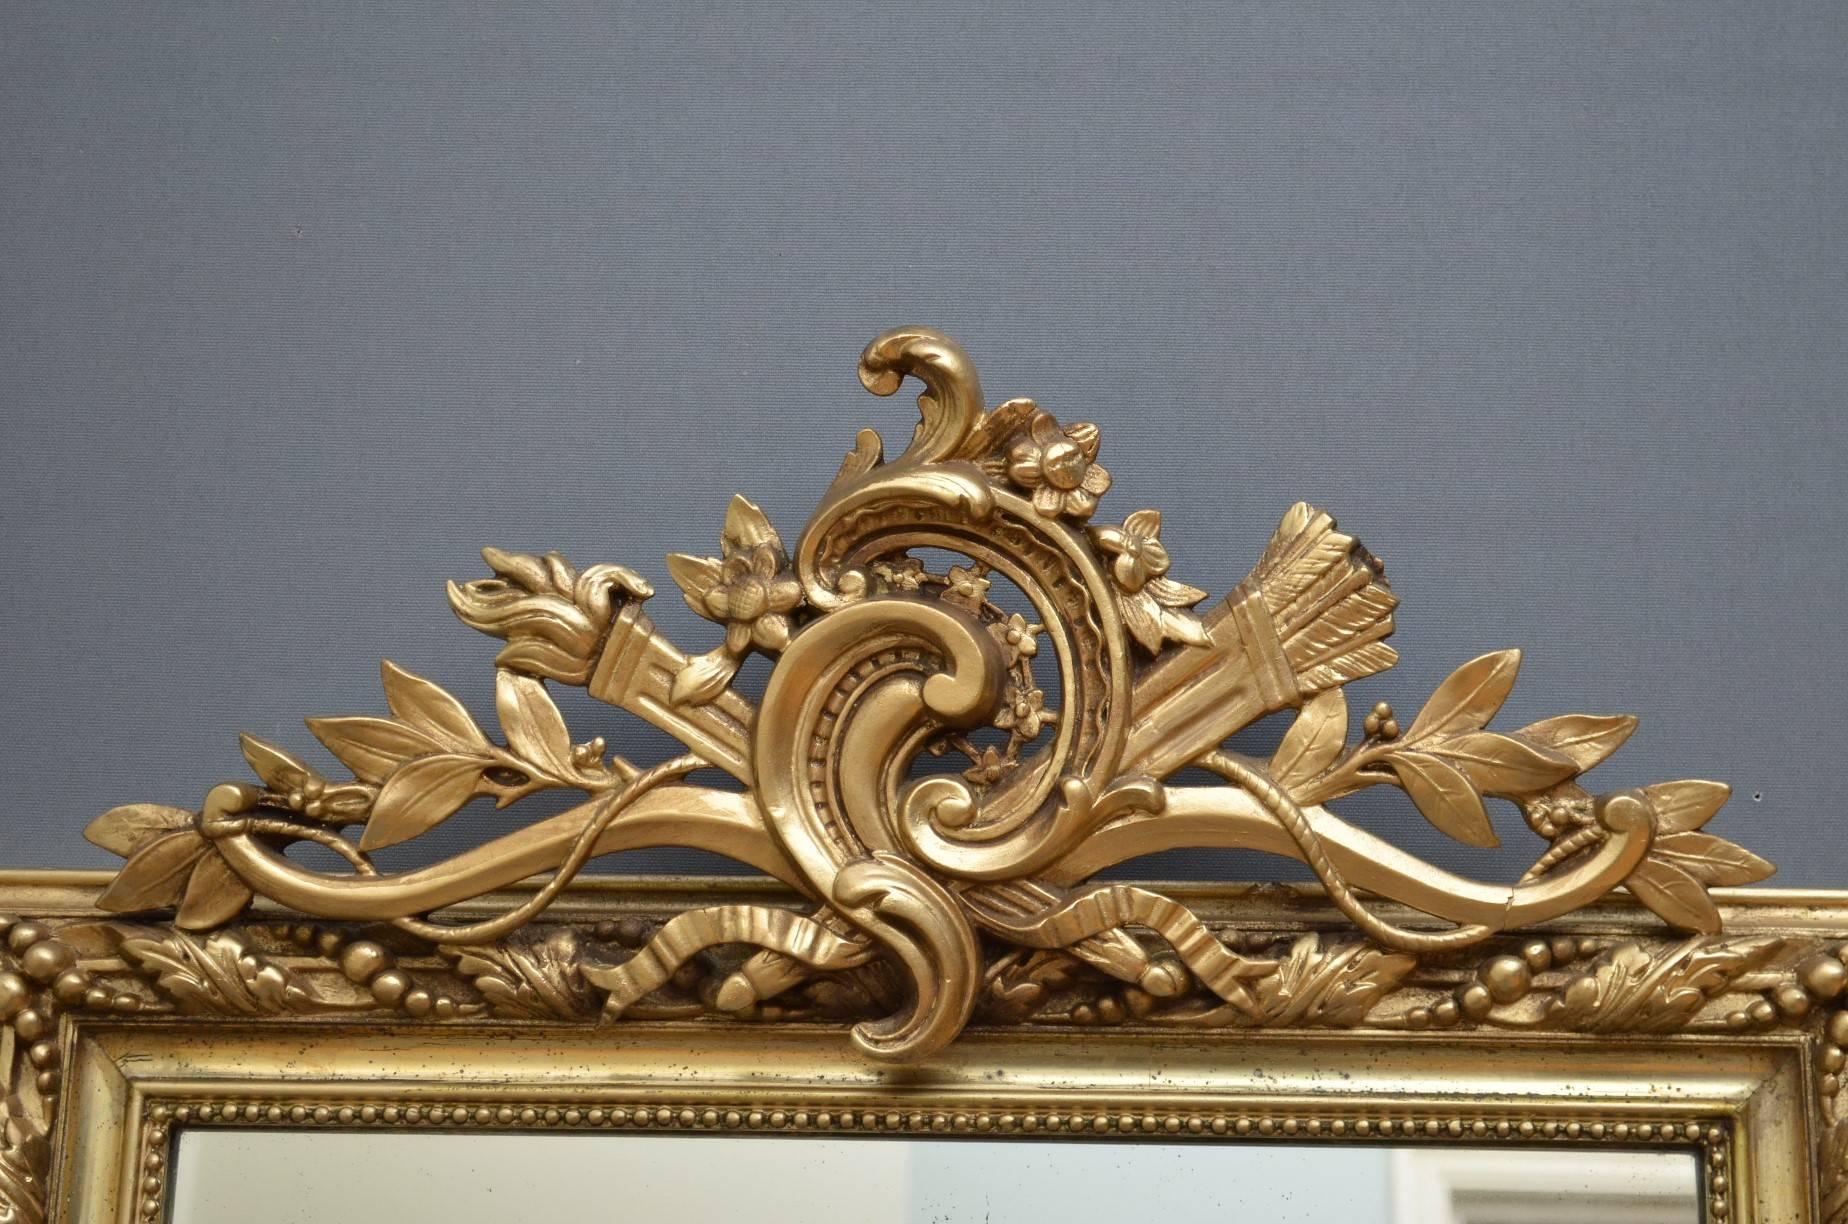 K0220 Elegant 19th century, gilt wall mirror, having fine cresting with scrolls, flowers and leaves to top and original mirror plate in carved frame. This attractive overmantel has been refinished and is fantastic condition throughout ready to place